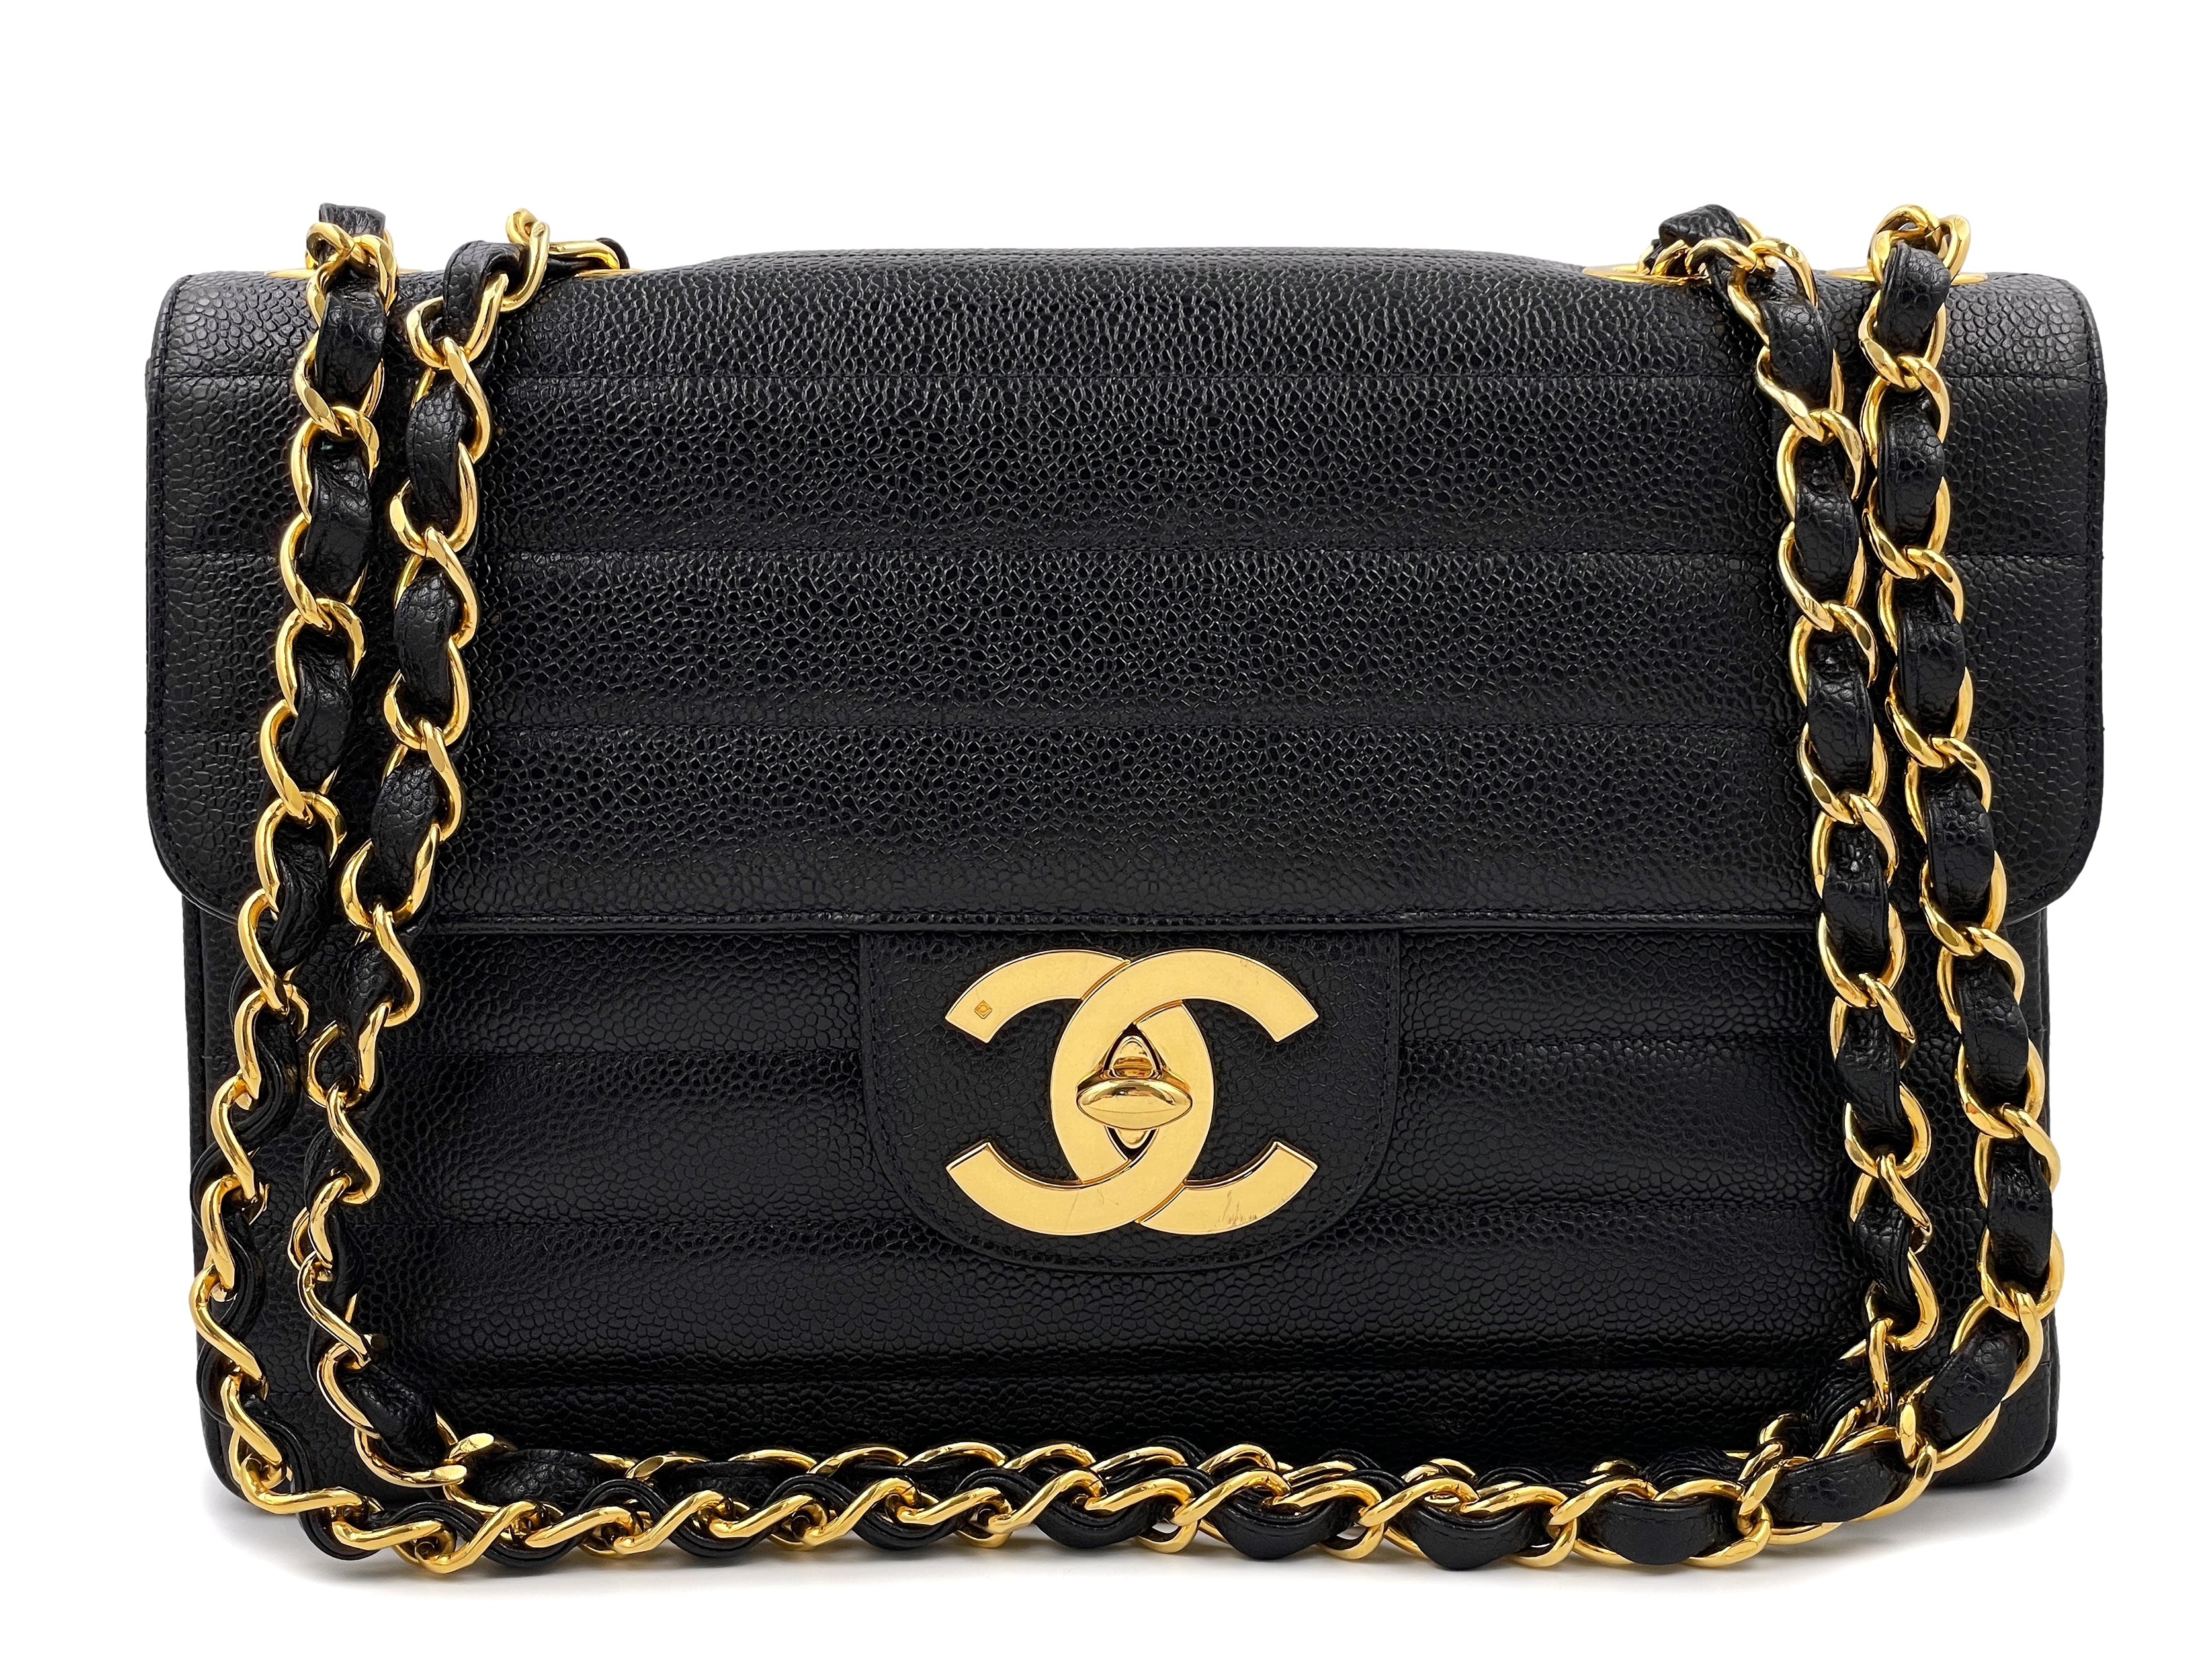 Chanel Kelly Bag - 41 For Sale on 1stDibs  chanel kelly vintage bag, chanel  vintage kelly flap bag, chanel mini kelly